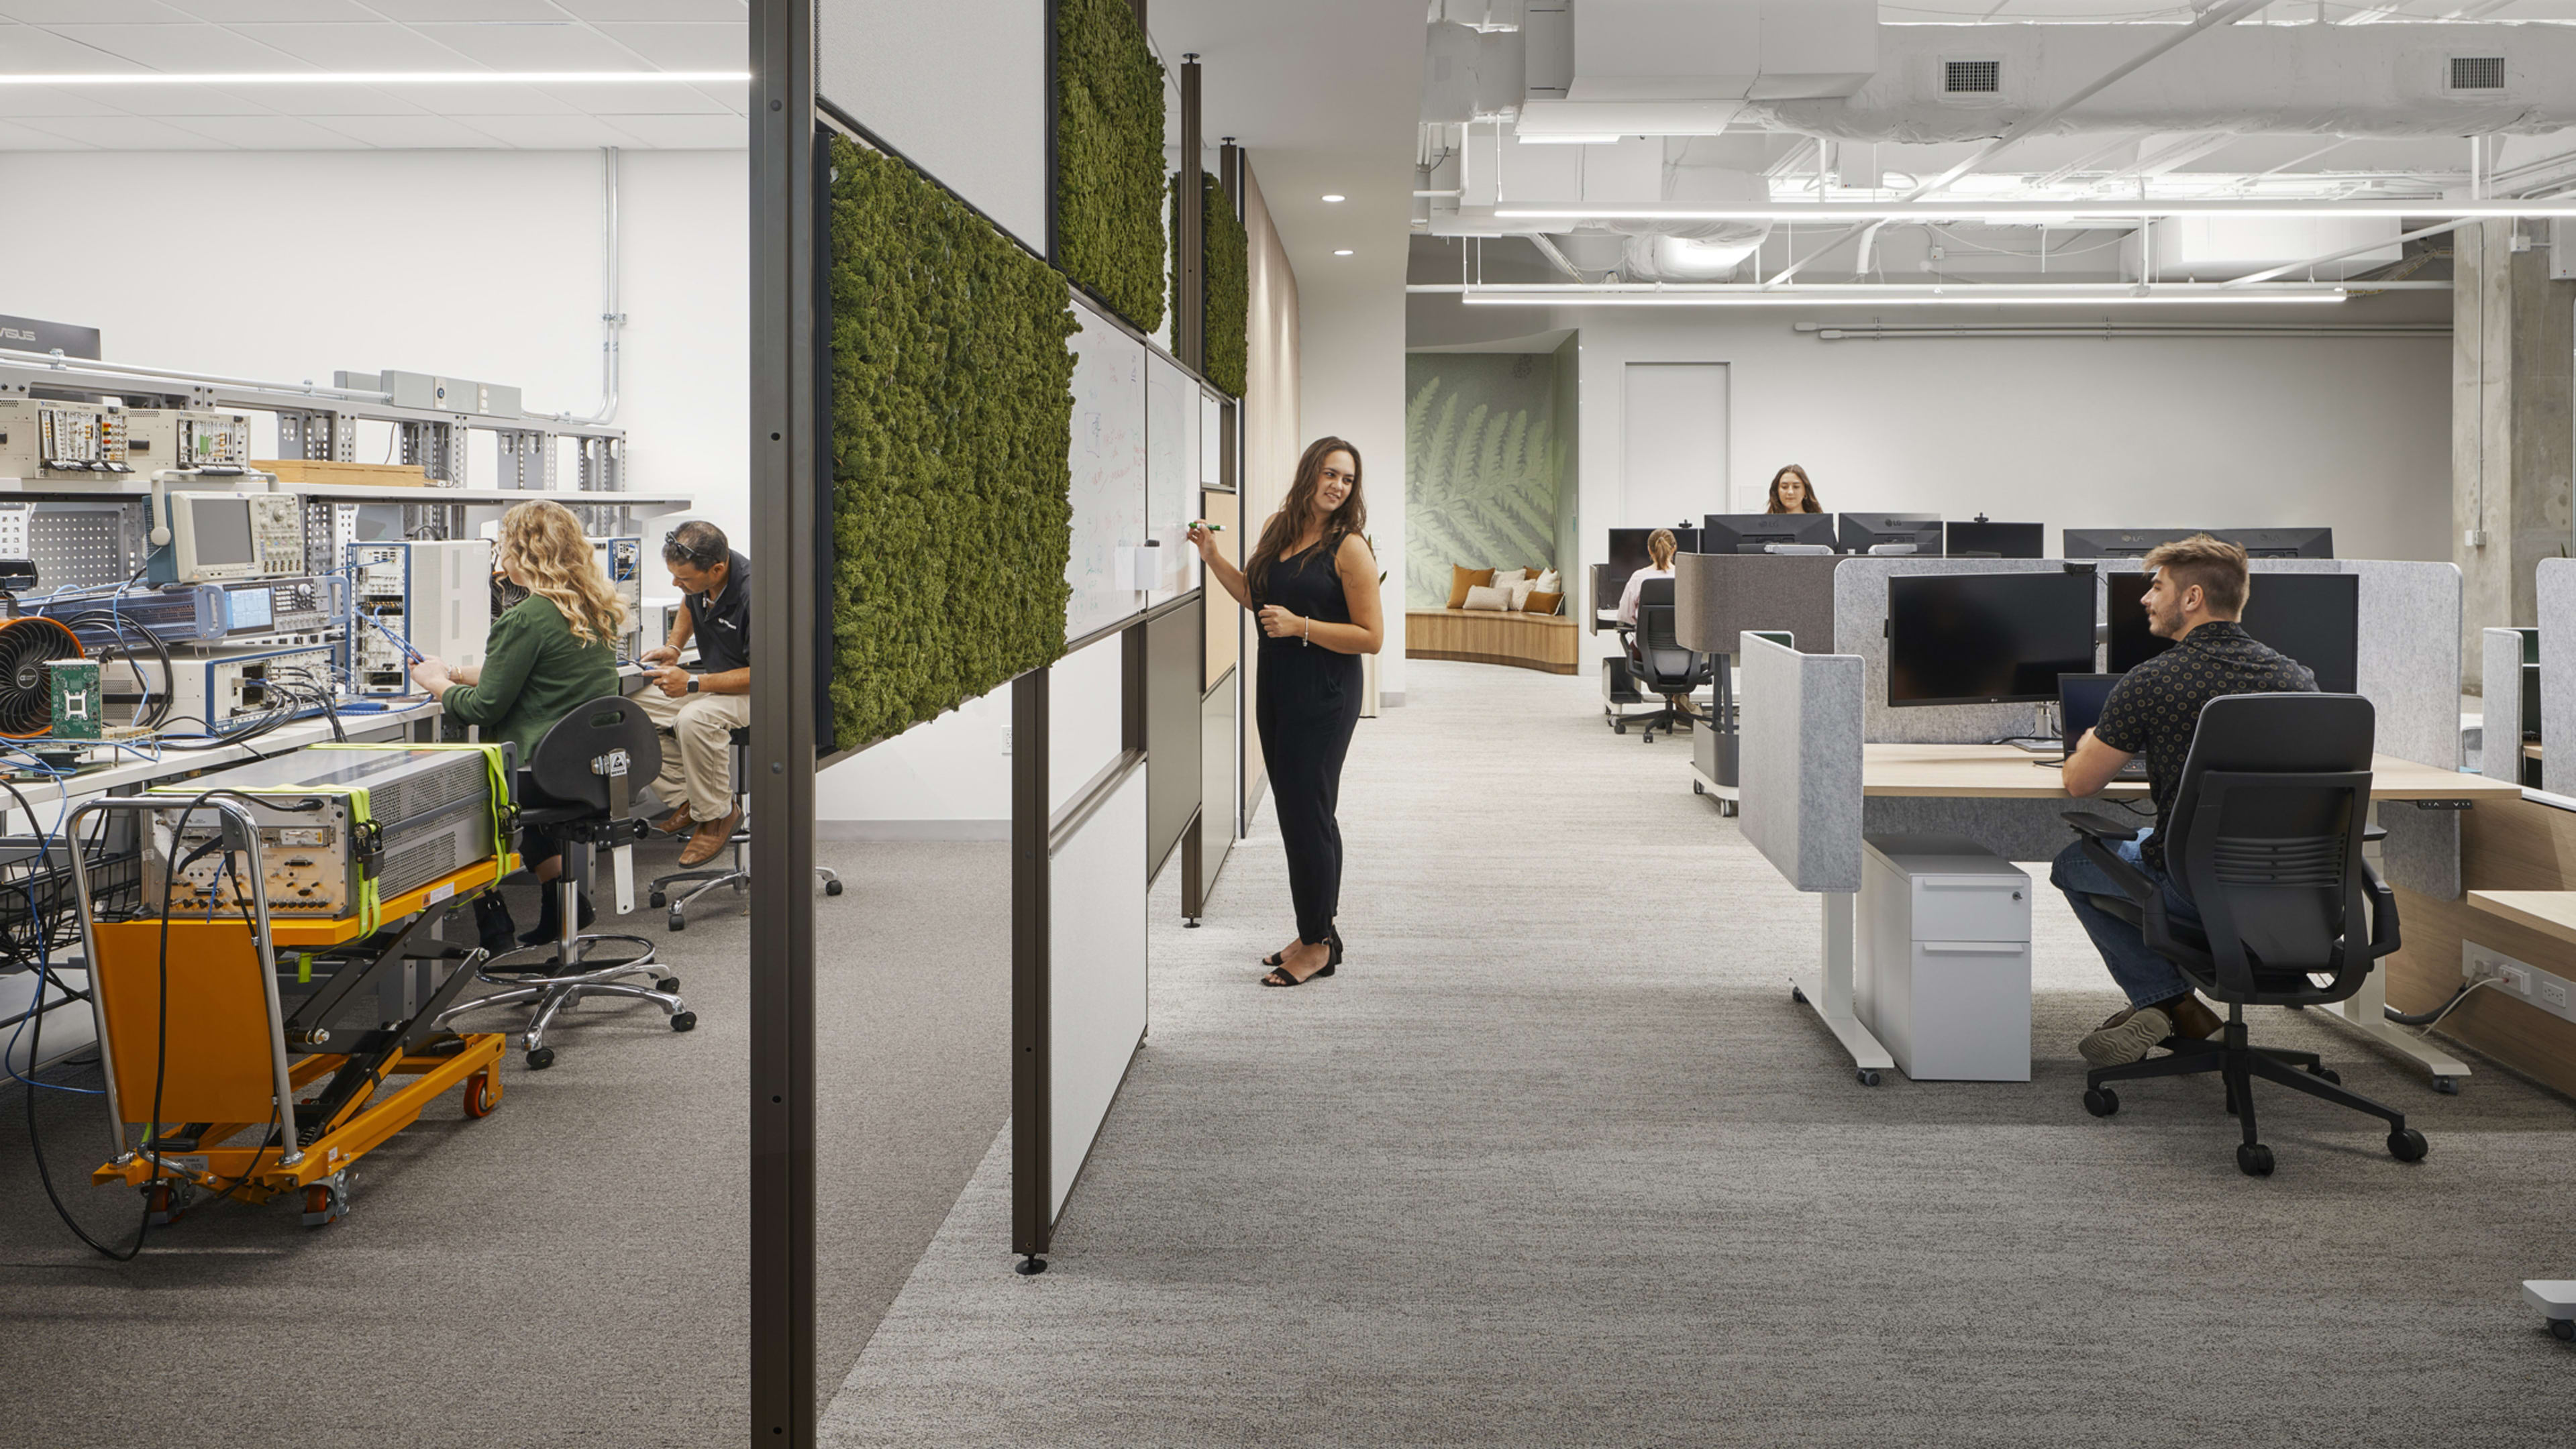 This company beta tested its way to a perfect office design